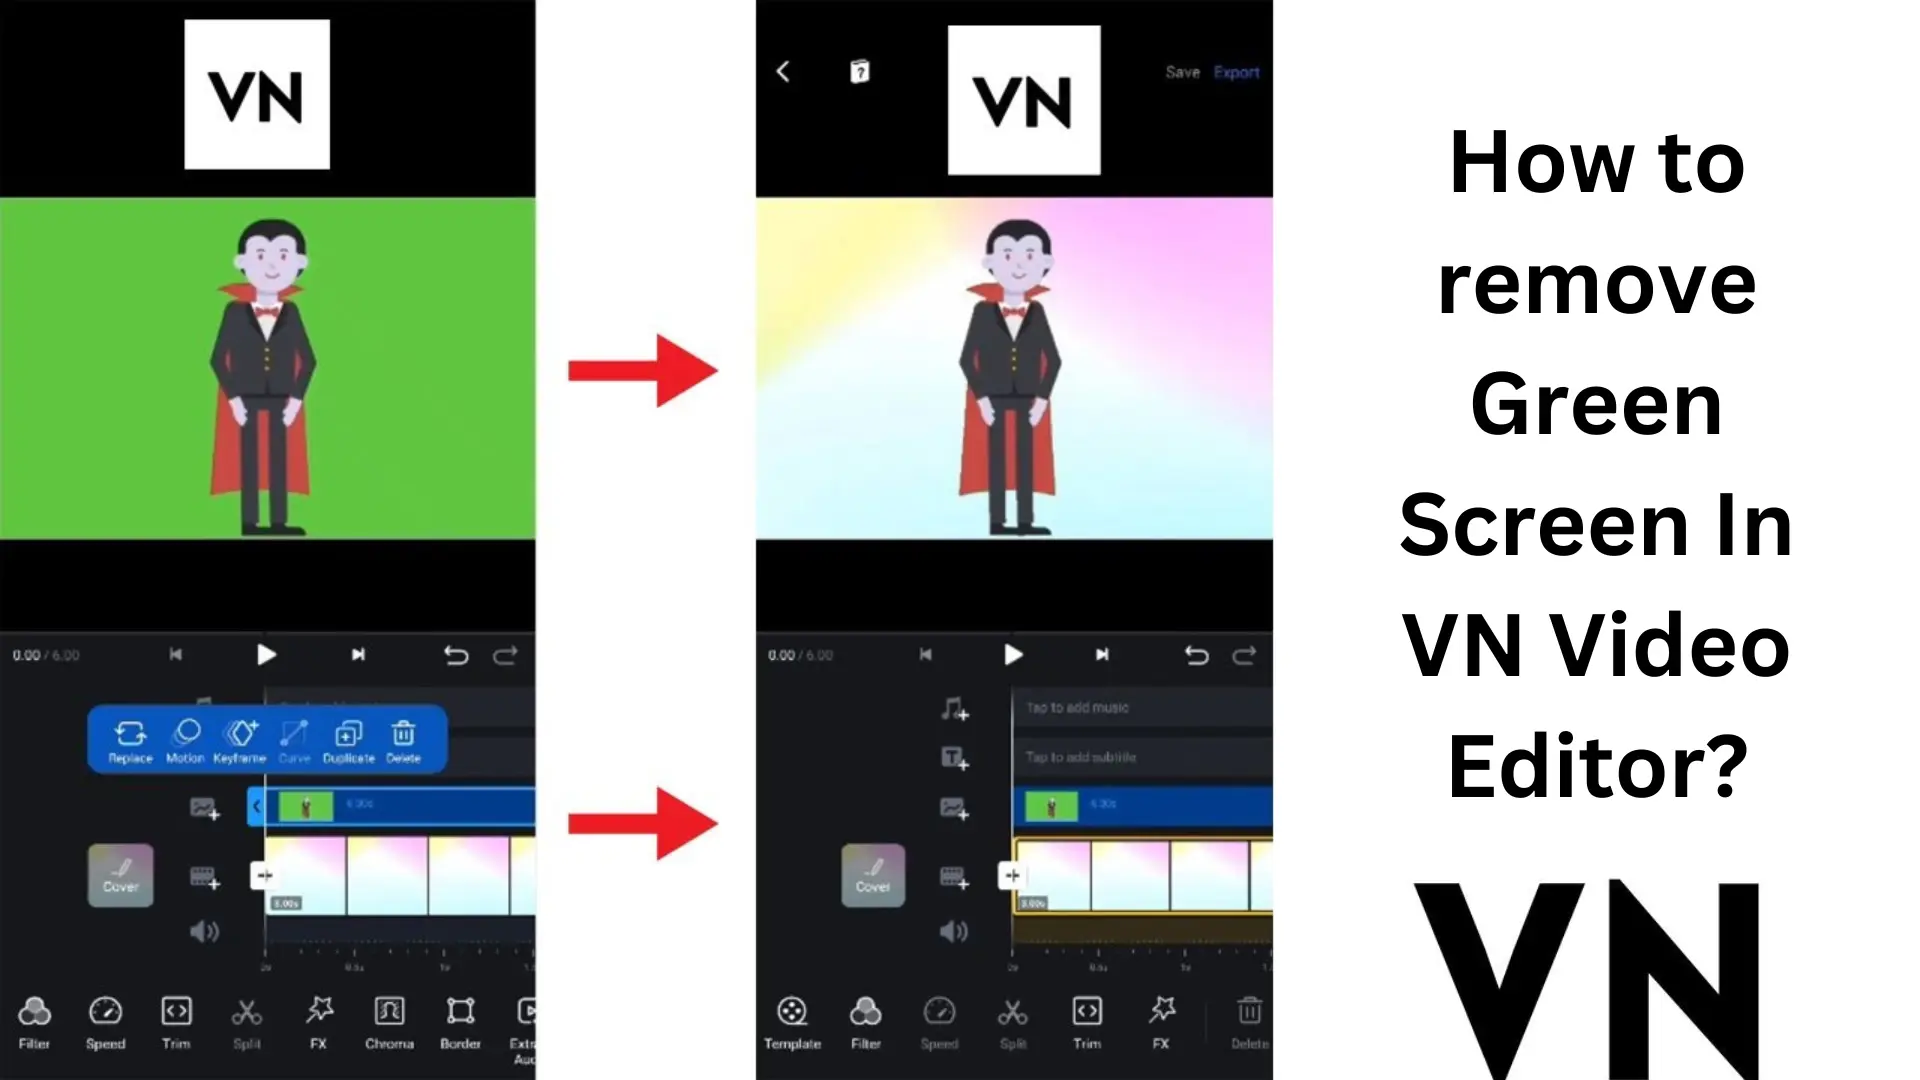 how to remove green screen in VN Video Editor?